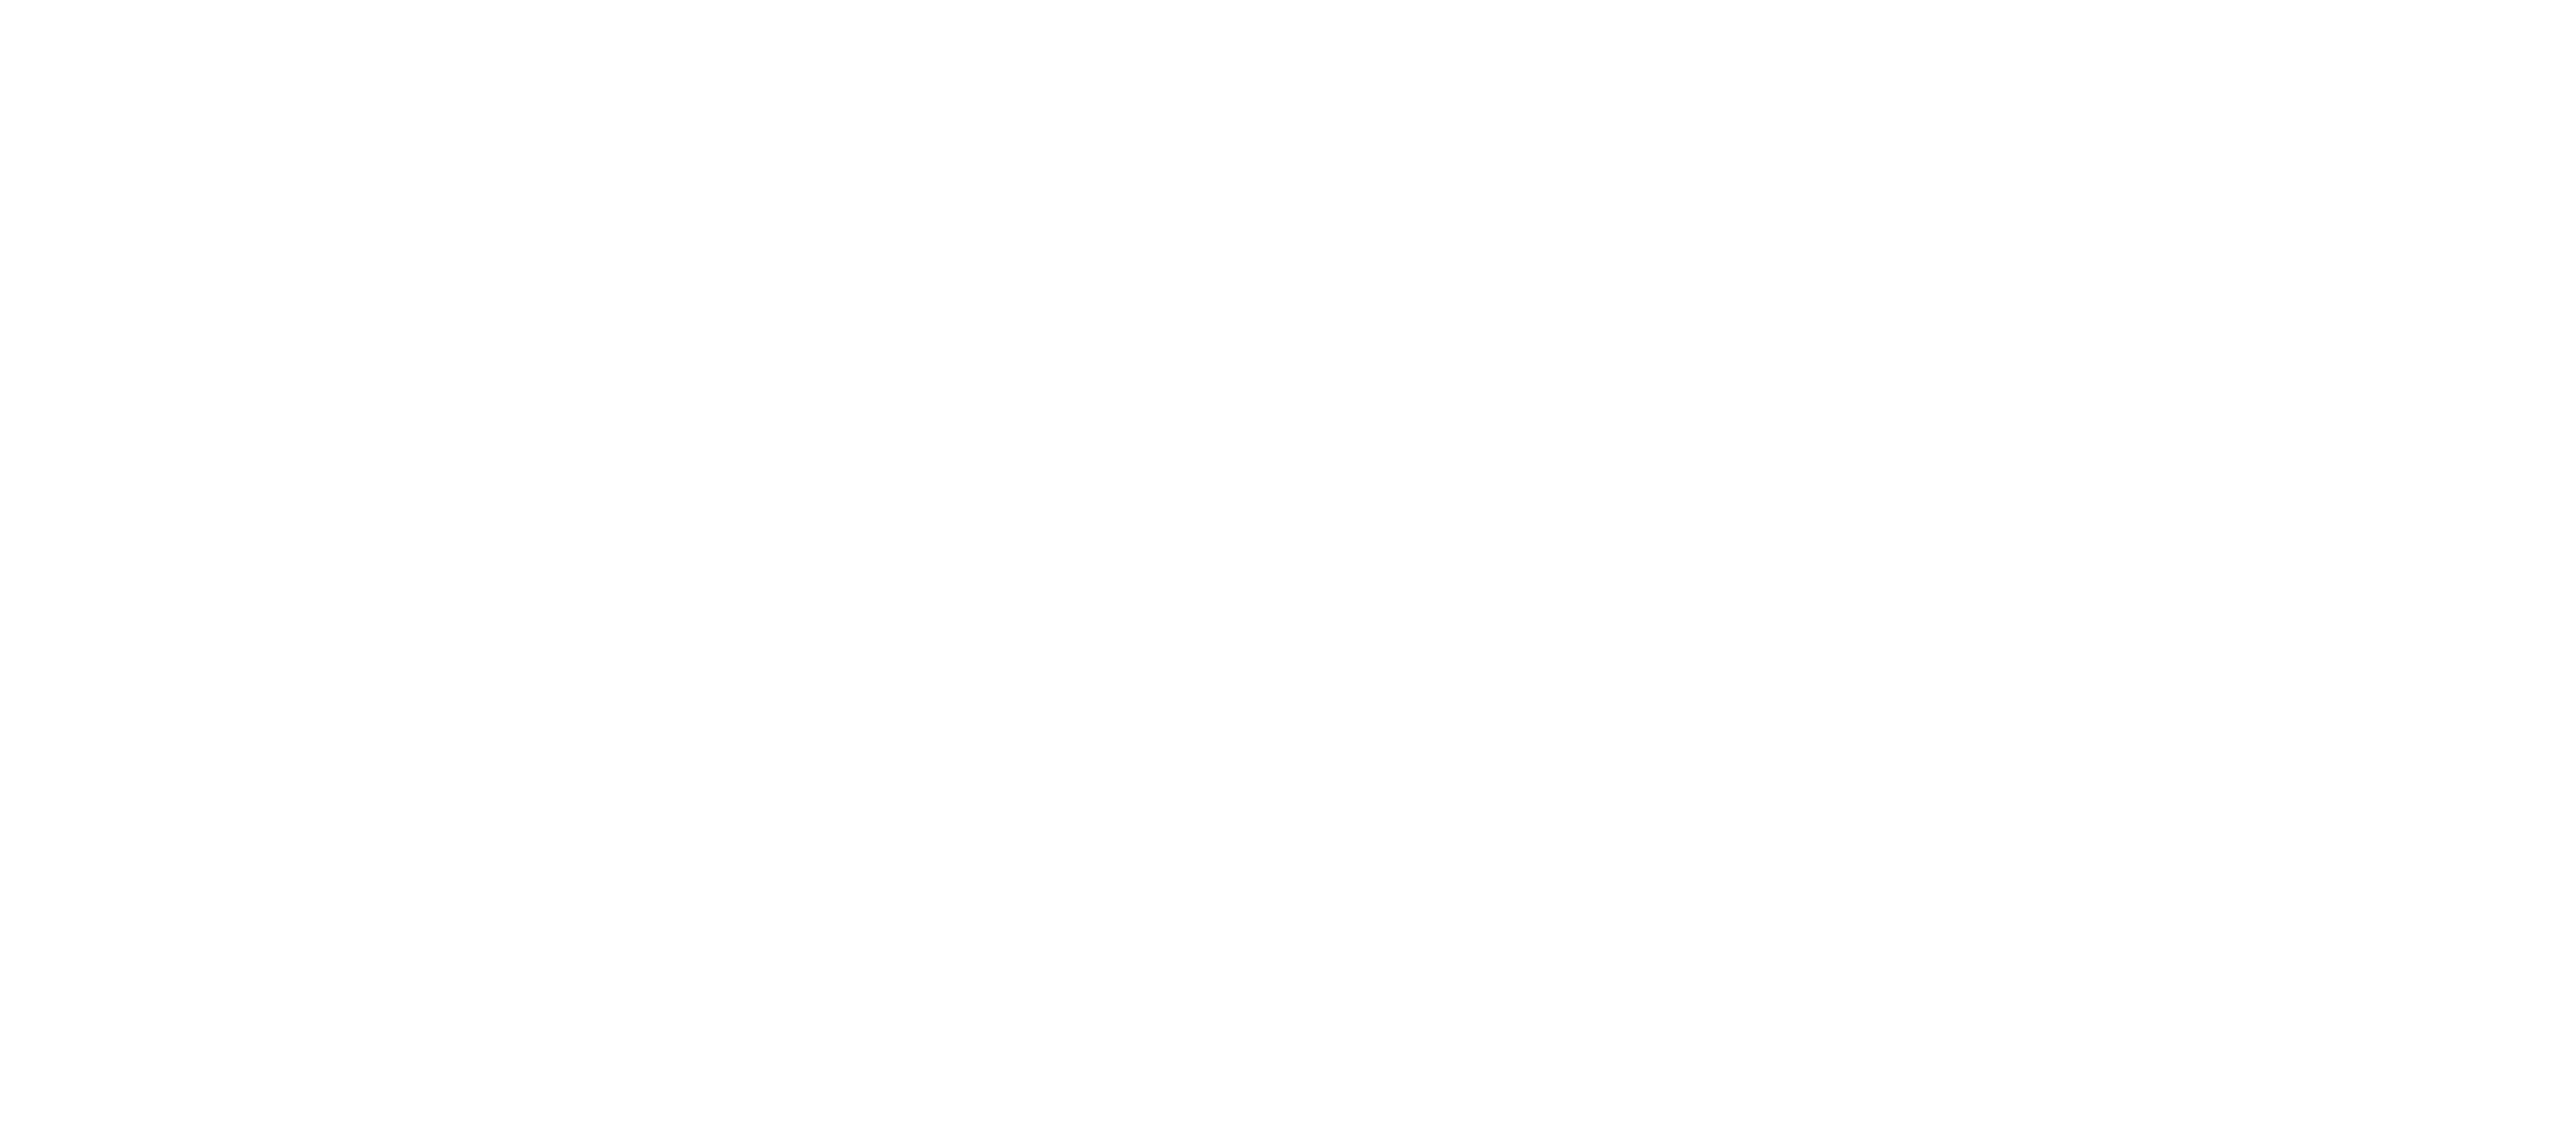 Splitsville and Howl at the Moon